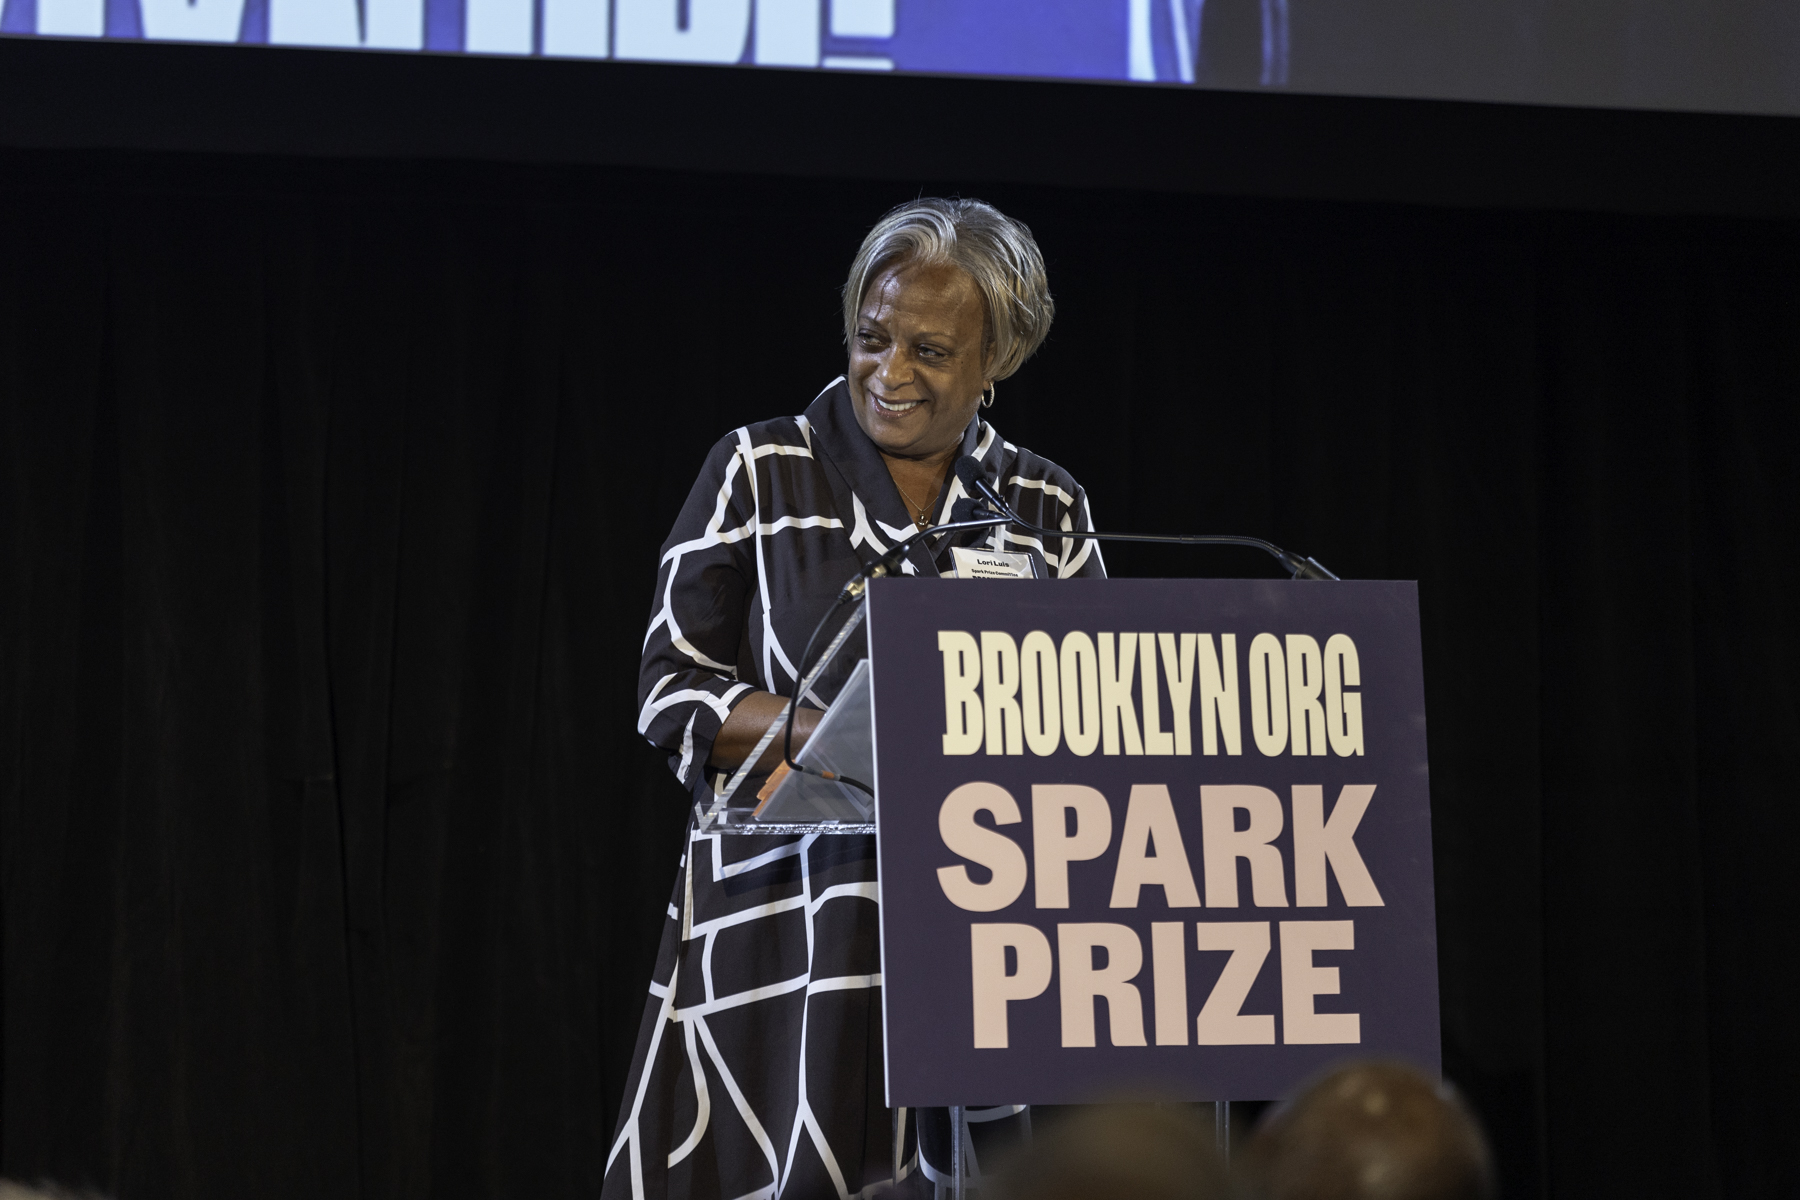 Woman speaking at a podium labeled "brooklyn.org spark prize.